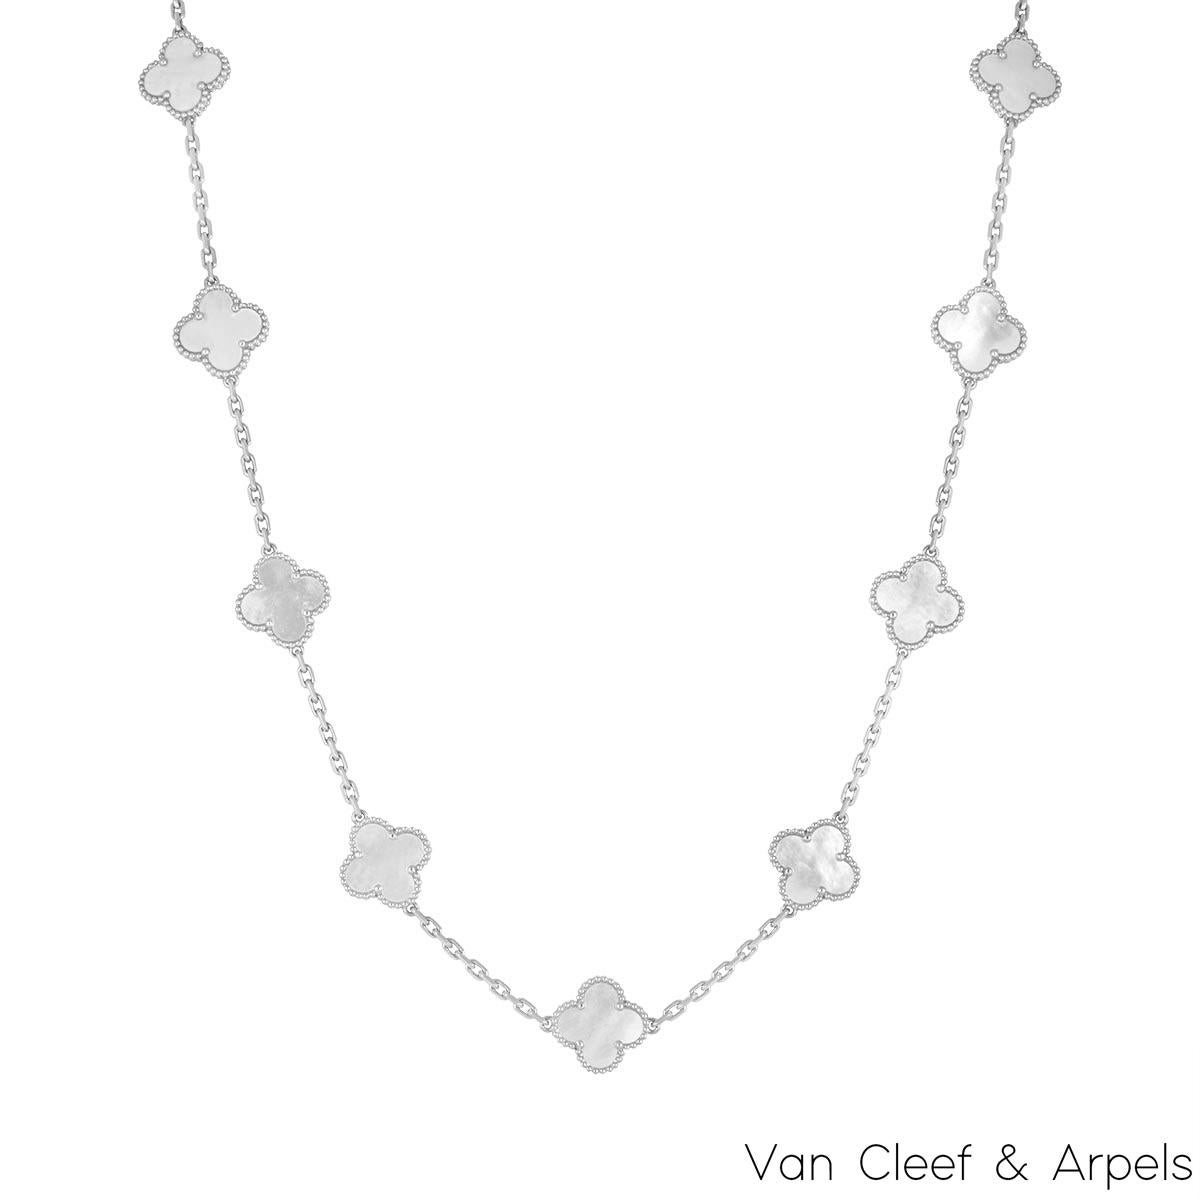 A beautiful 18k white gold mother of pearl necklace from the Vintage Alhambra collection by Van Cleef & Arpels. Features 20 iconic clover motifs, each set with a beaded edge and a mother of pearl inlay, set throughout the length of the necklace. The